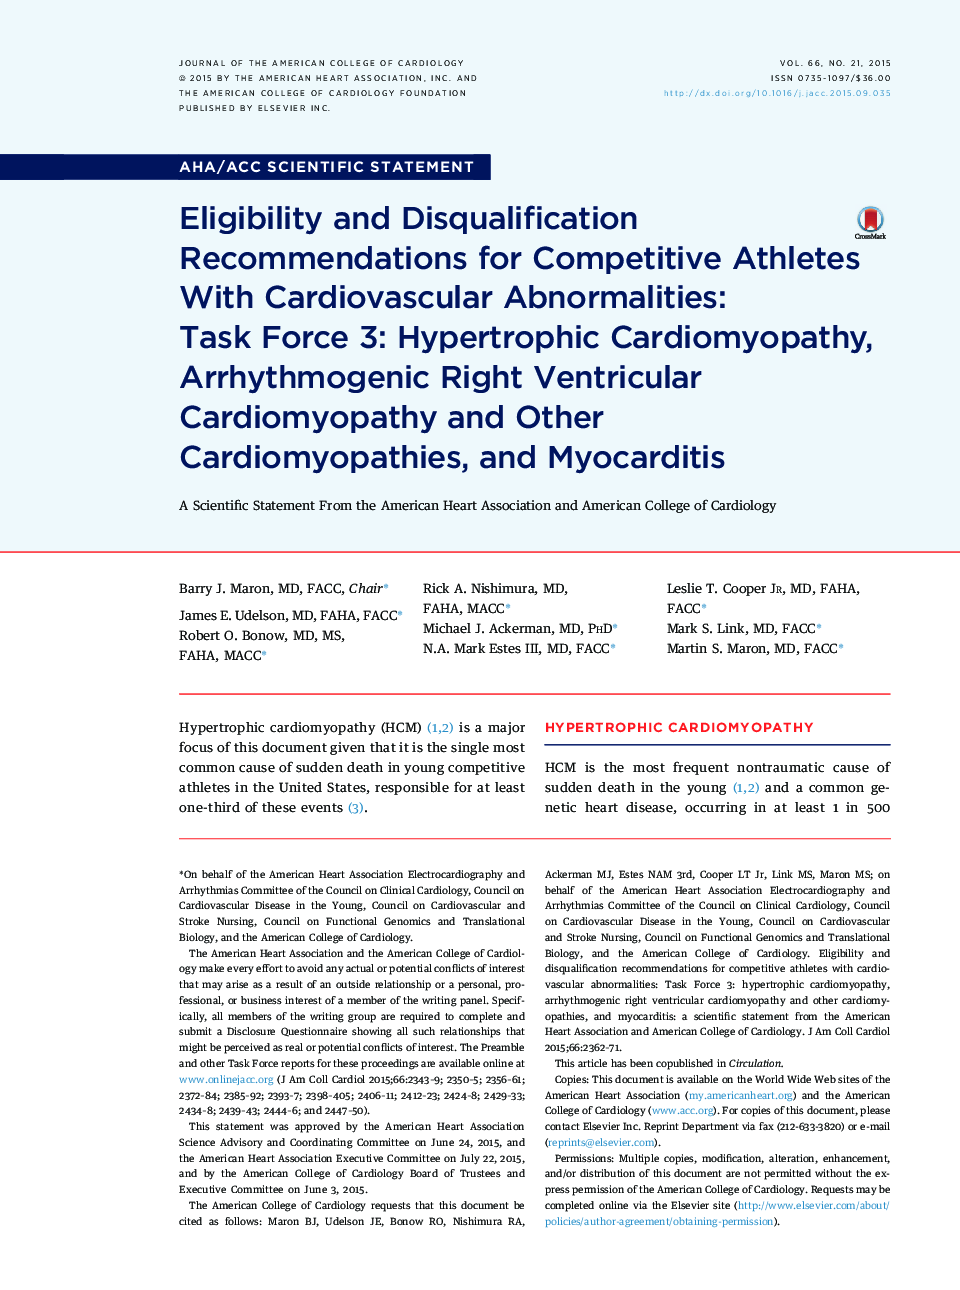 Eligibility and Disqualification Recommendations for Competitive Athletes With Cardiovascular Abnormalities: TaskÂ Force 3: Hypertrophic Cardiomyopathy, Arrhythmogenic Right Ventricular Cardiomyopathy and Other Cardiomyopathies, and Myocarditis